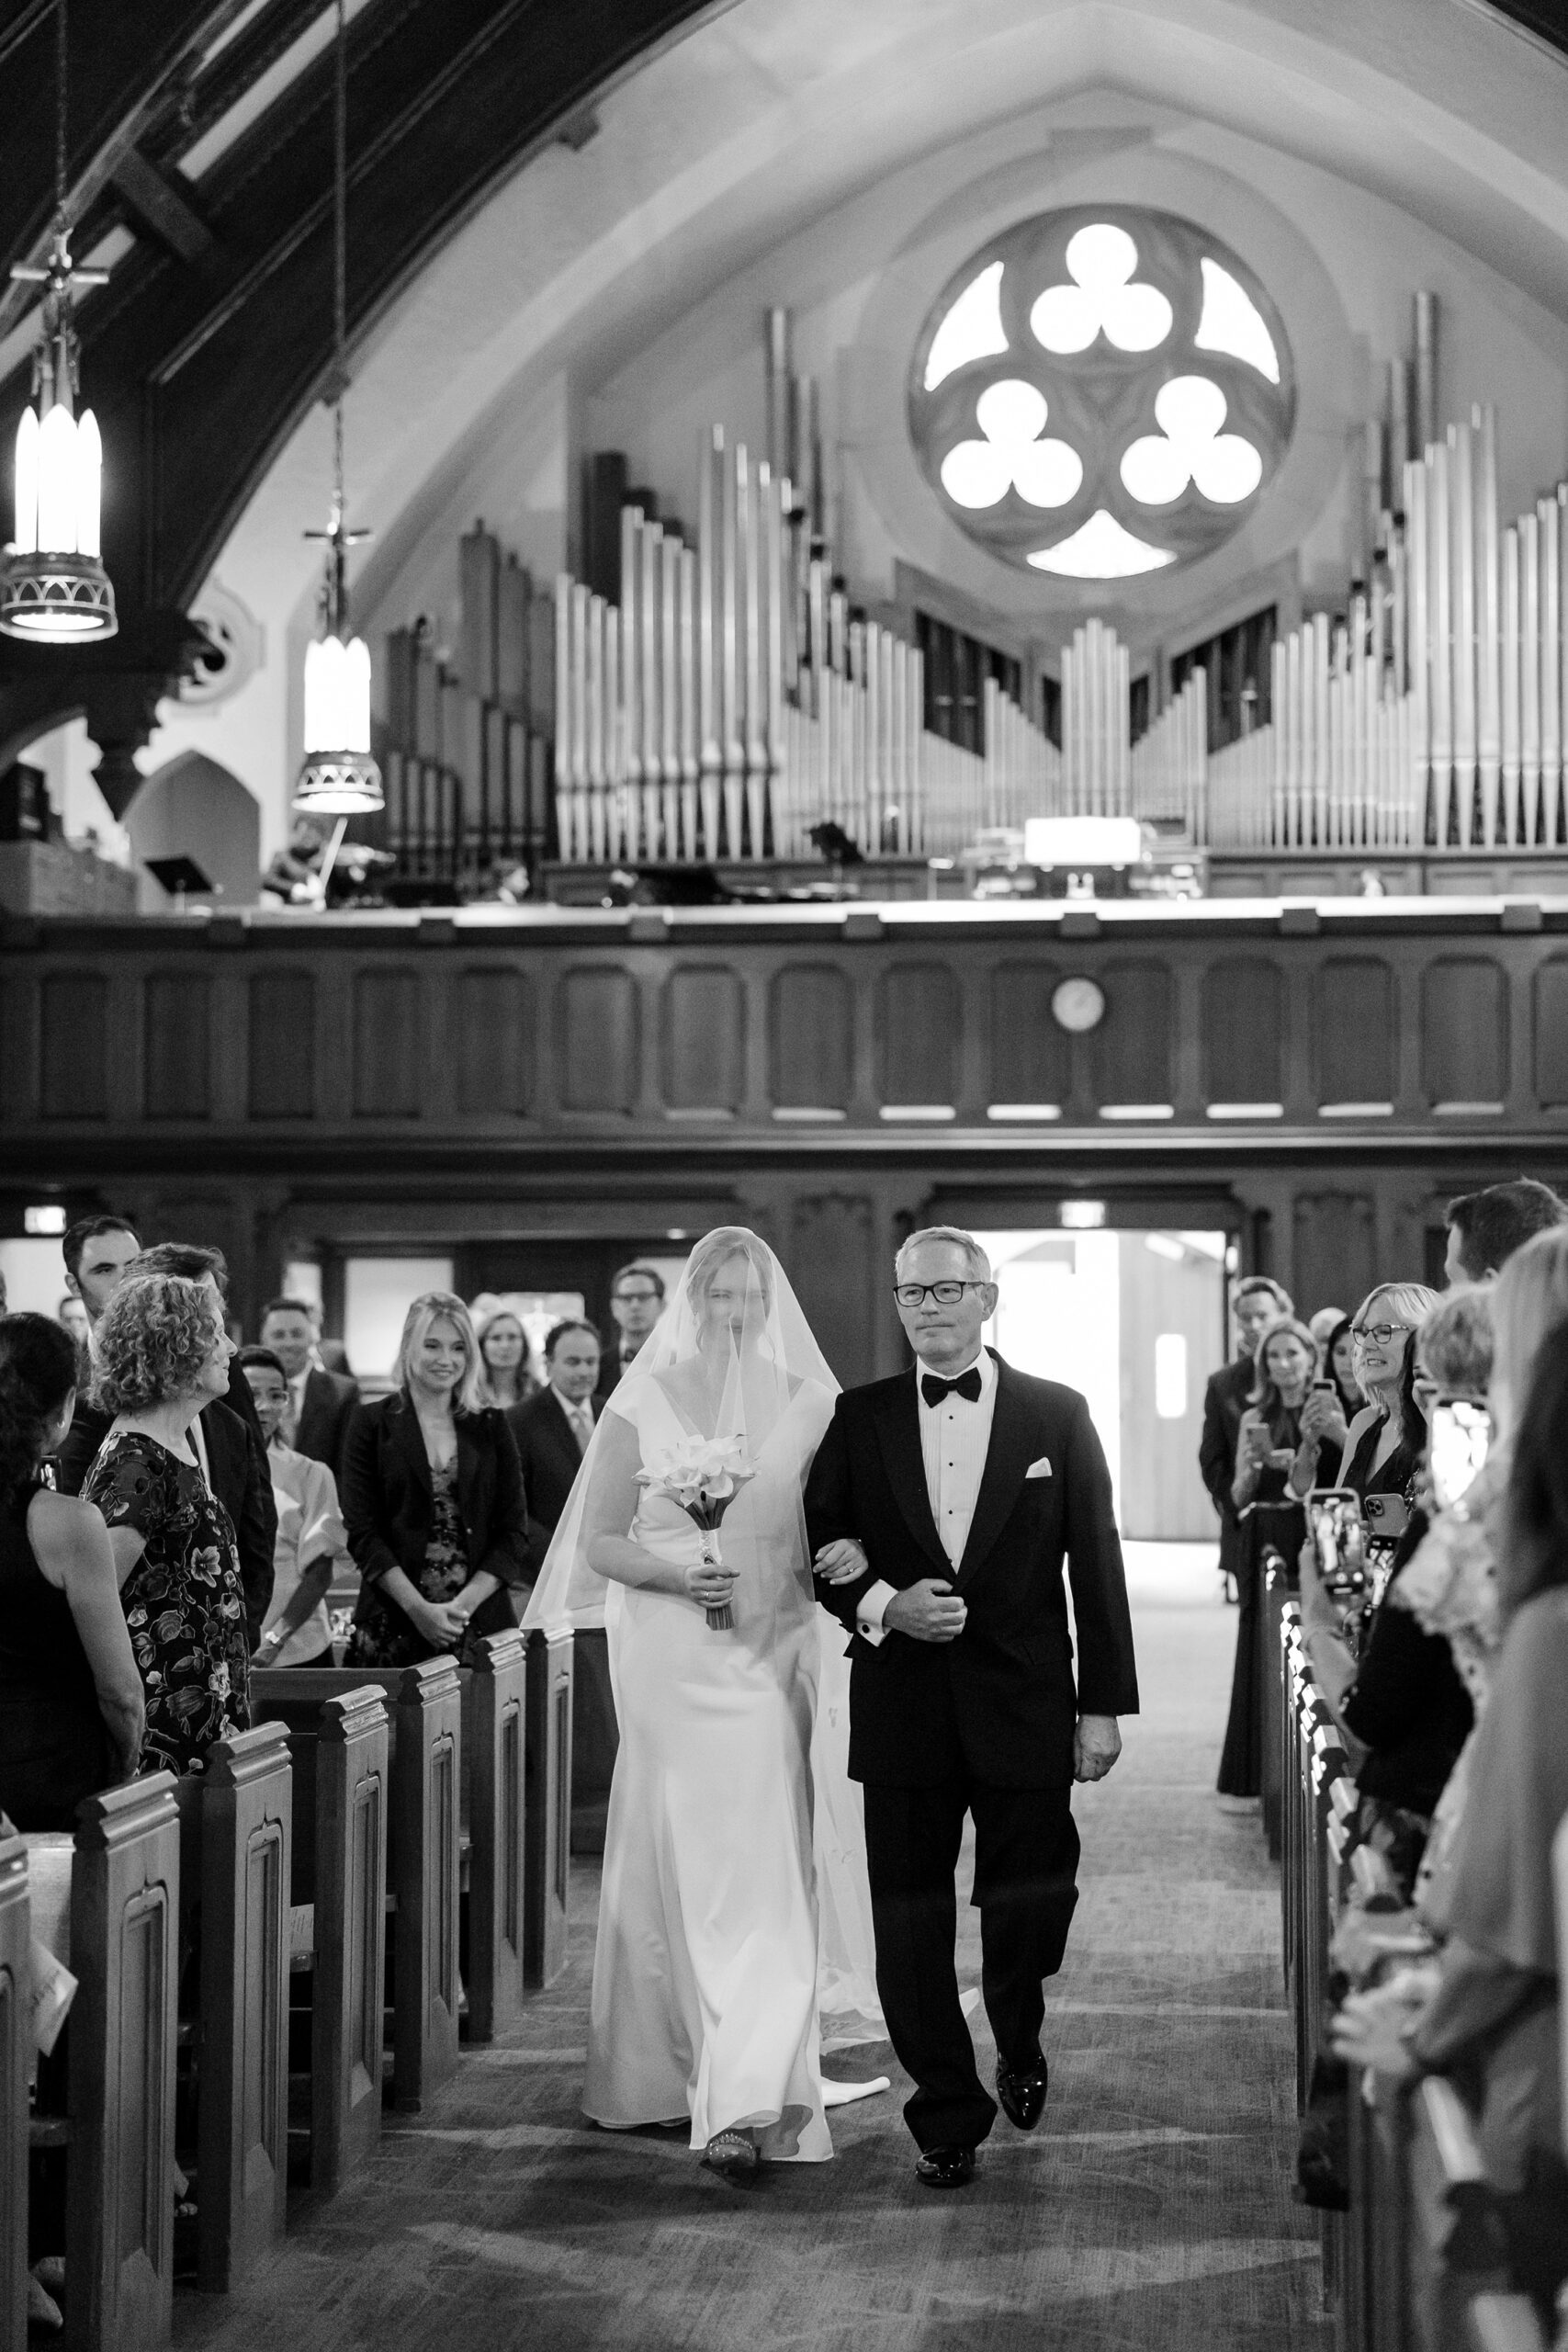 Bride's father walked her down the aisle at her Chicago wedding